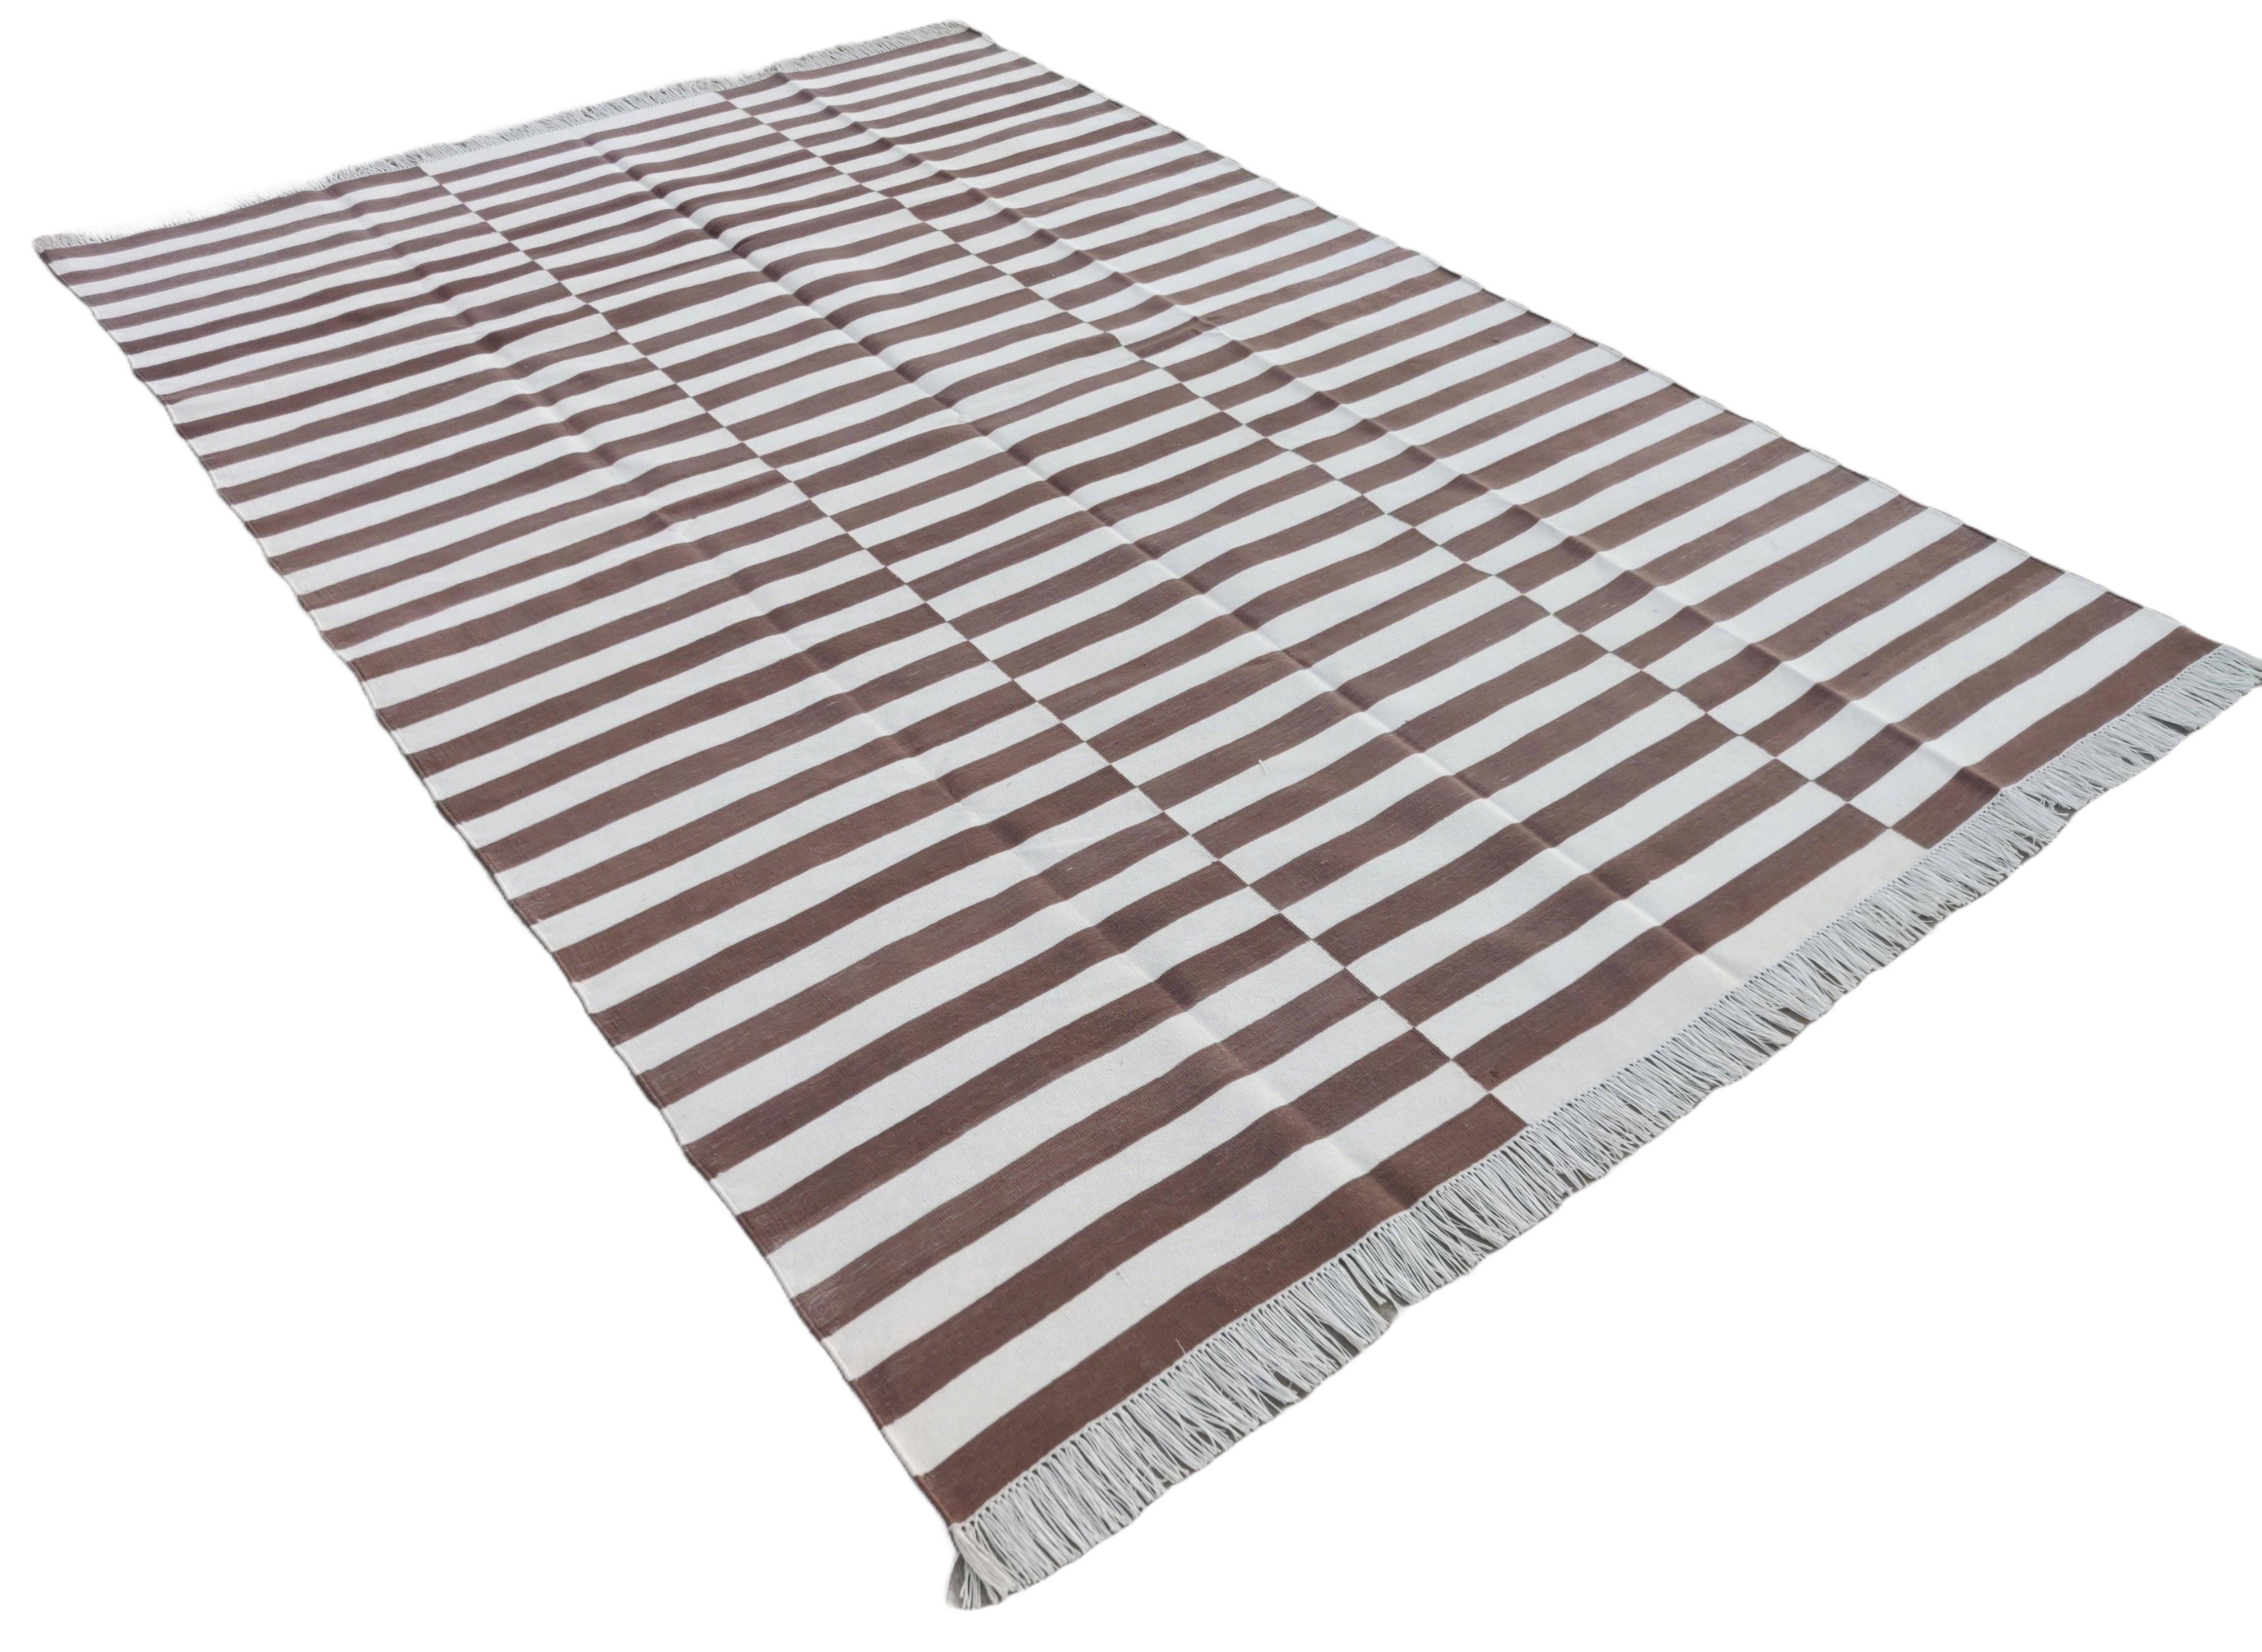 Cotton Natural Vegetable Dyed Brown And White Striped Rug-6'x9'
These special flat-weave dhurries are hand-woven with 15 ply 100% cotton yarn. Due to the special manufacturing techniques used to create our rugs, the size and color of each piece may